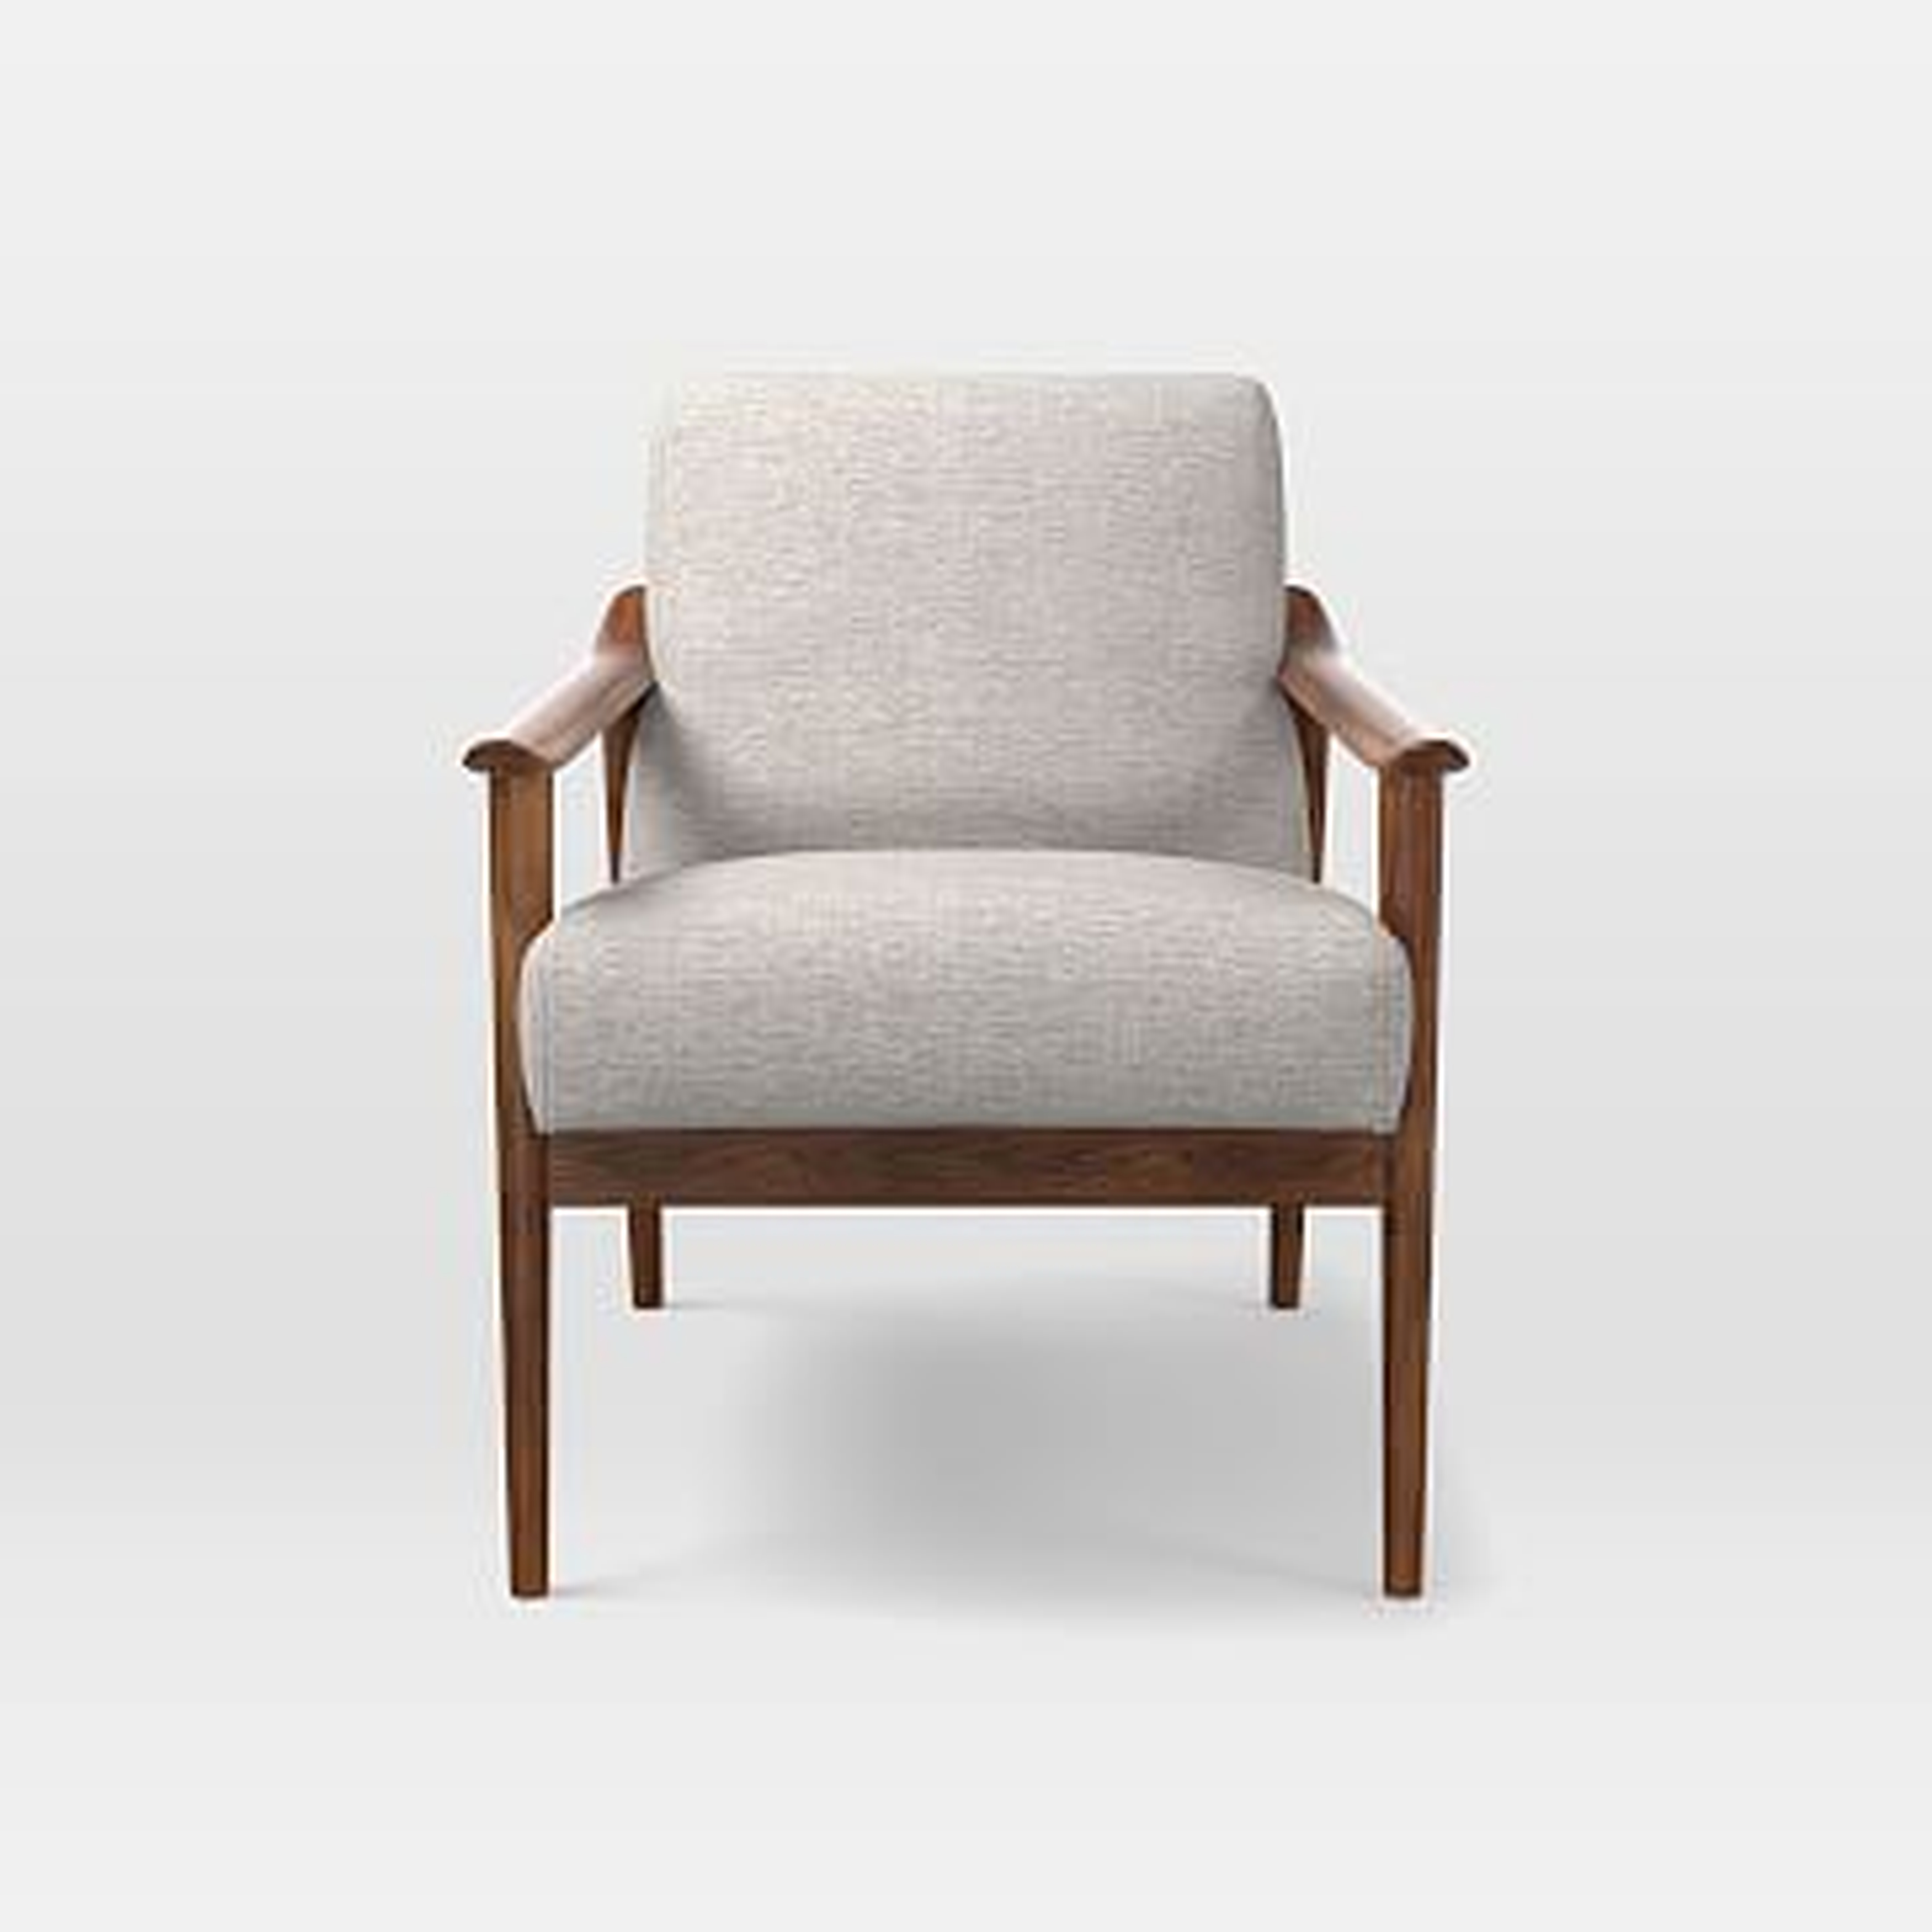 Midcentury Show Wood Upholstered Chair, Twill, Wheat - West Elm